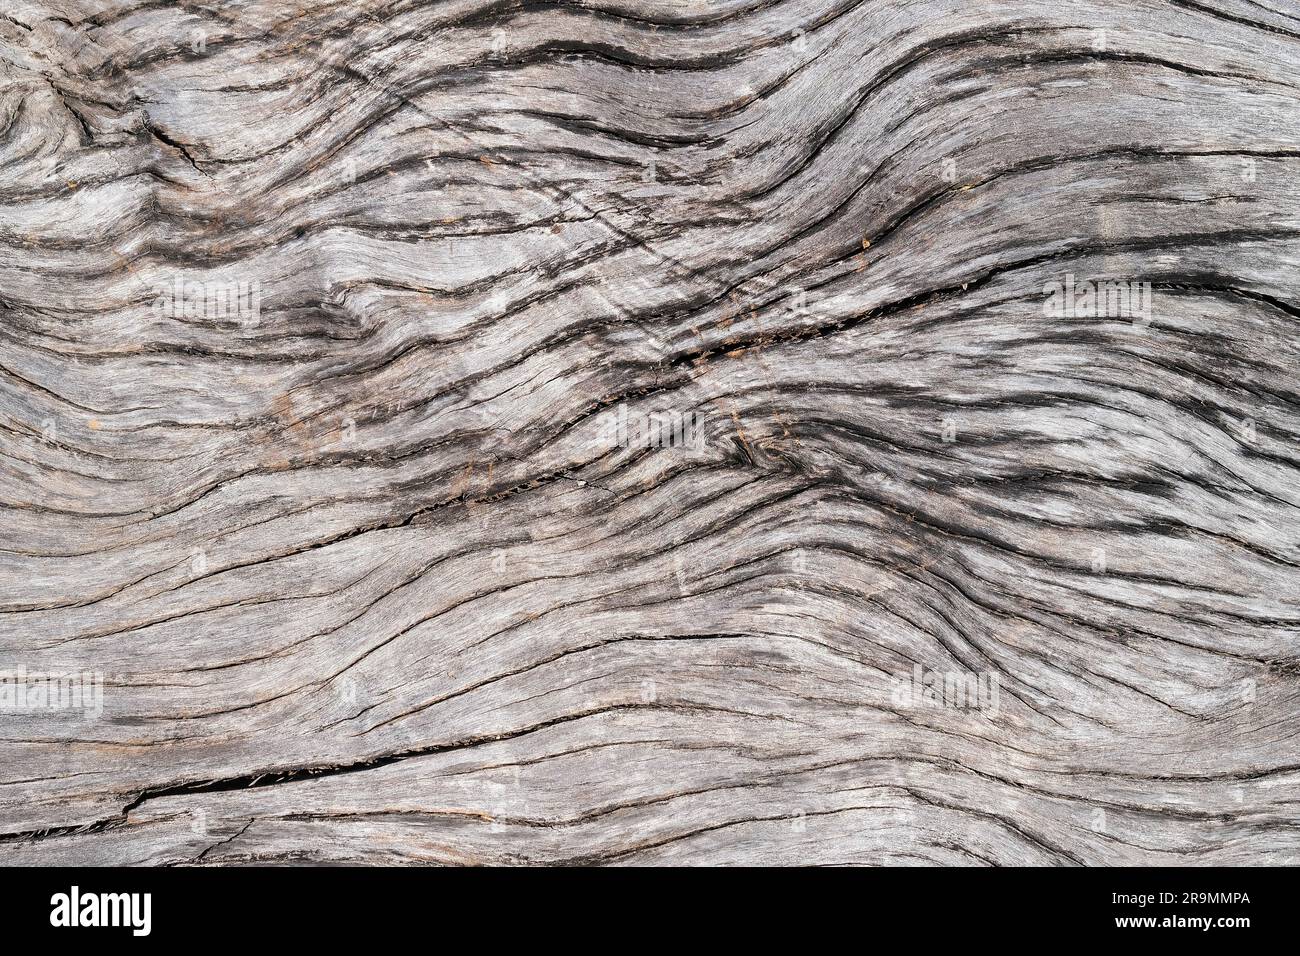 Sun-bleached dry driftwood close up Stock Photo